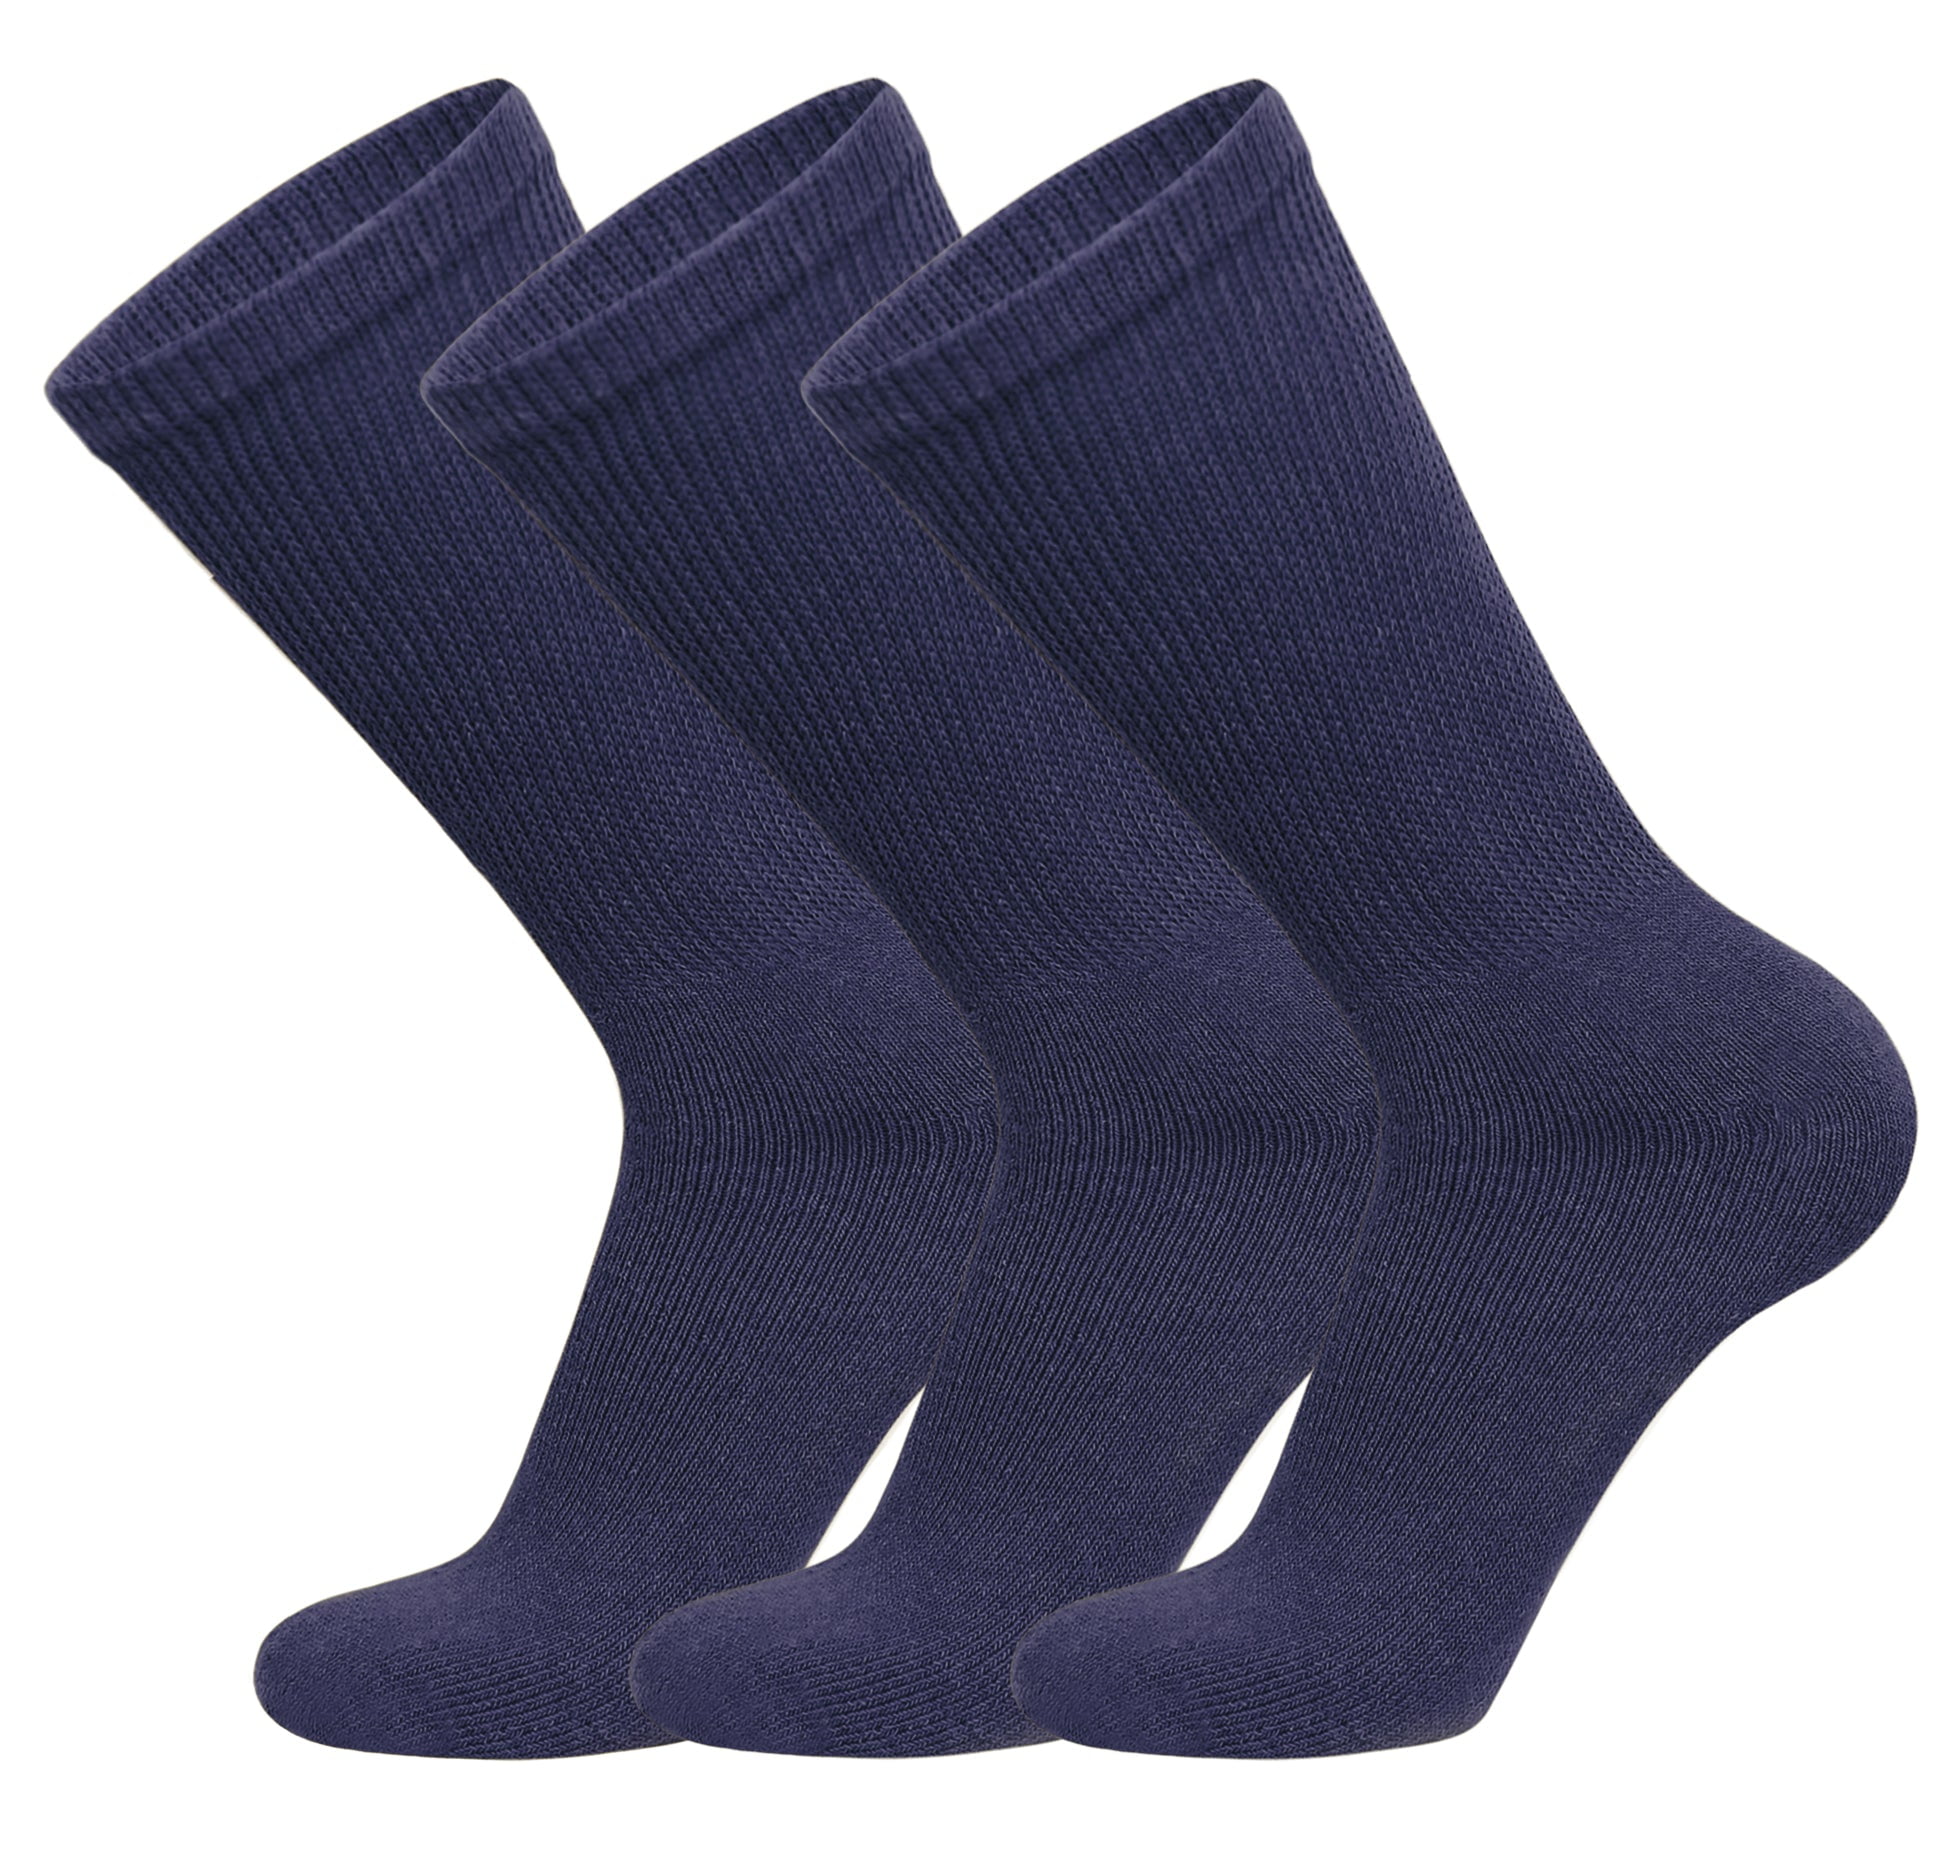 3 Pairs of Big and Tall Diabetic Cotton Neuropathy Crew Socks (Navy ...